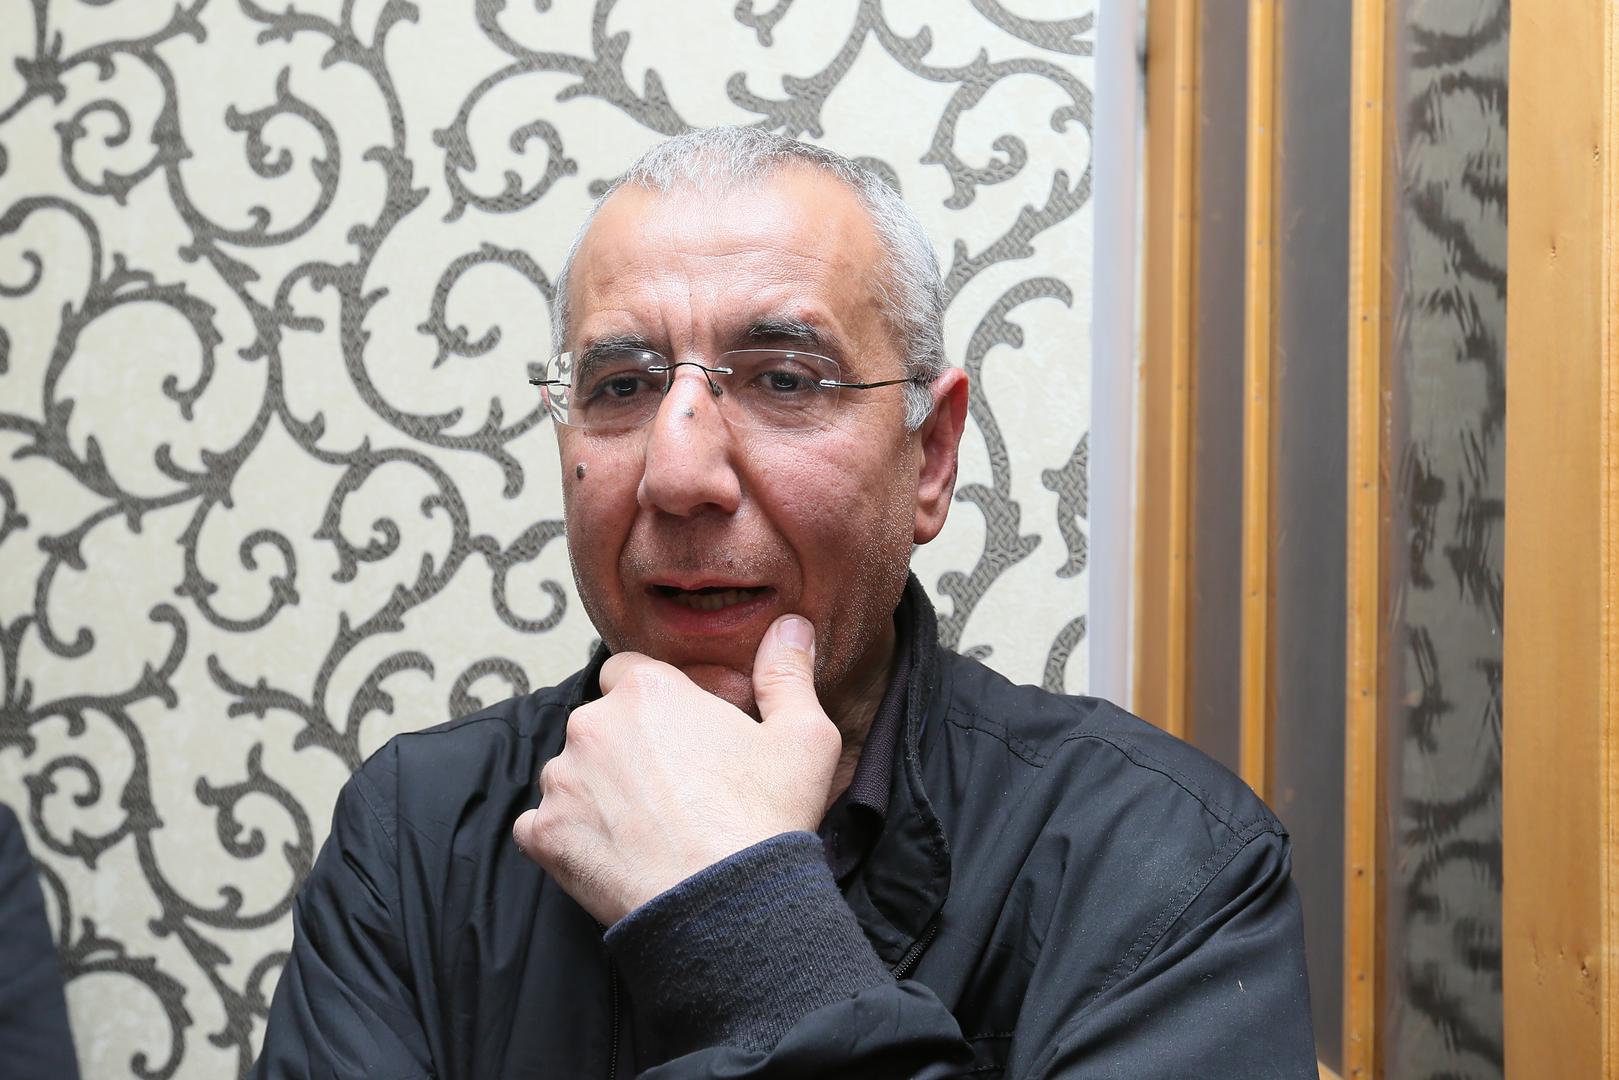 Azerbaijani lawyer, human rights defender Intigam Aliyev giving an interview after he was freed in Baku, Azerbaijan, March 28, 2016. 